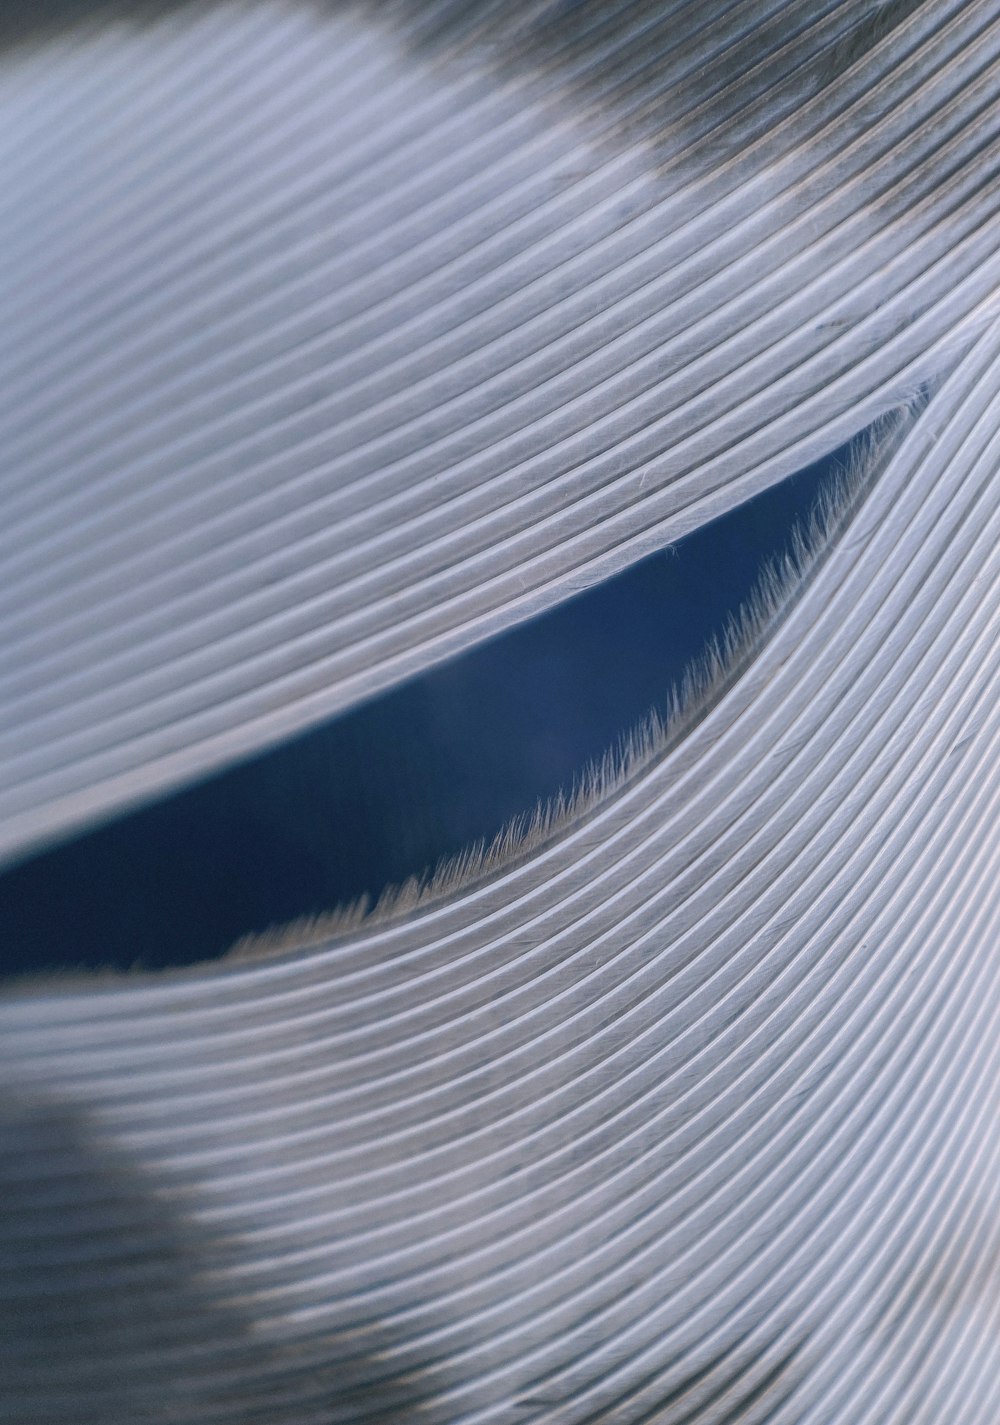 a close up view of a curved metal surface